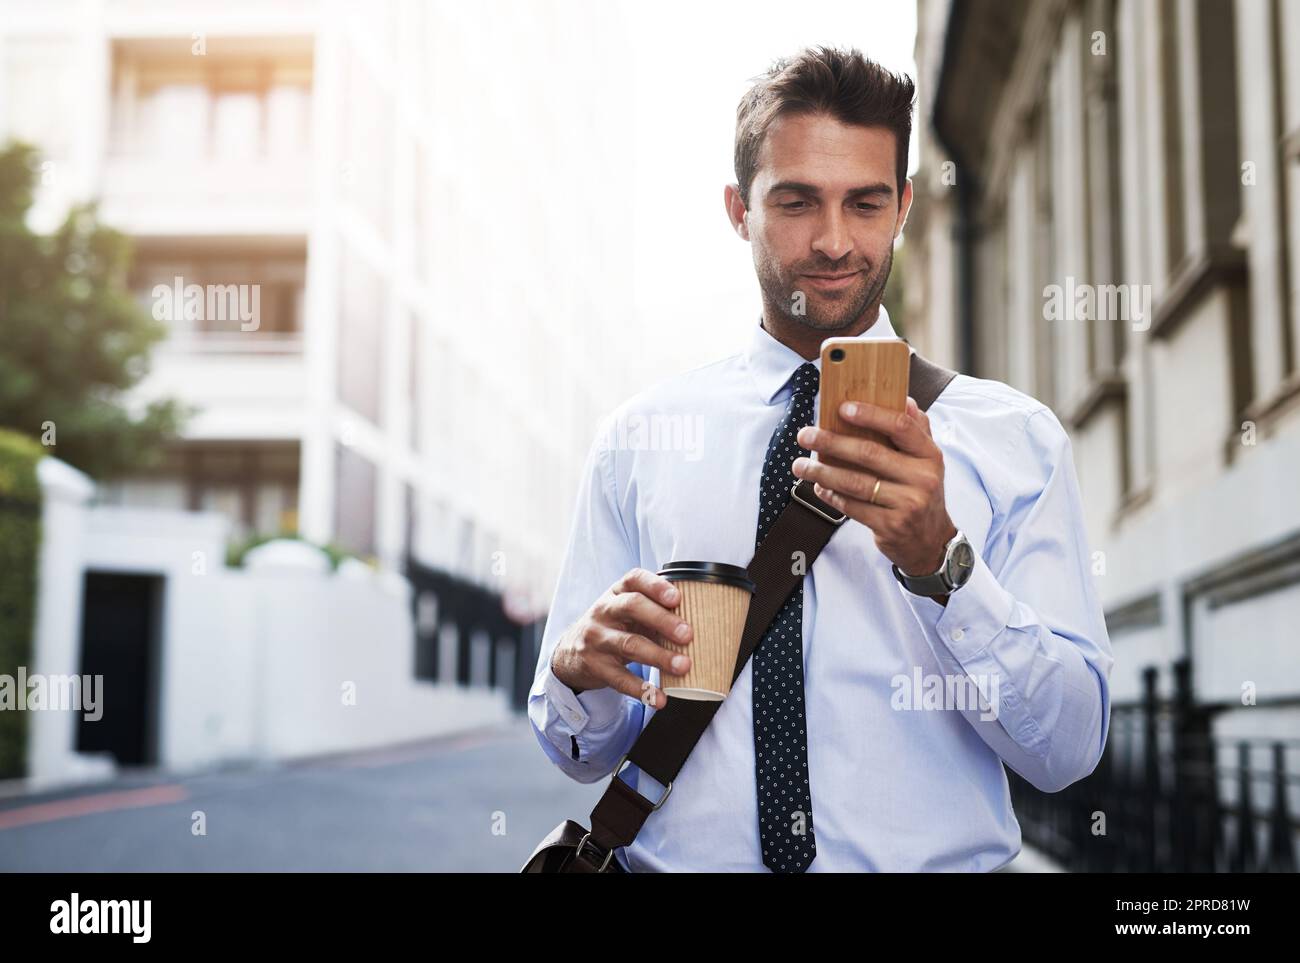 Talking on the phone this early in the morning. a handsome young businessman texting on his cellphone while heading to work in the morning. Stock Photo